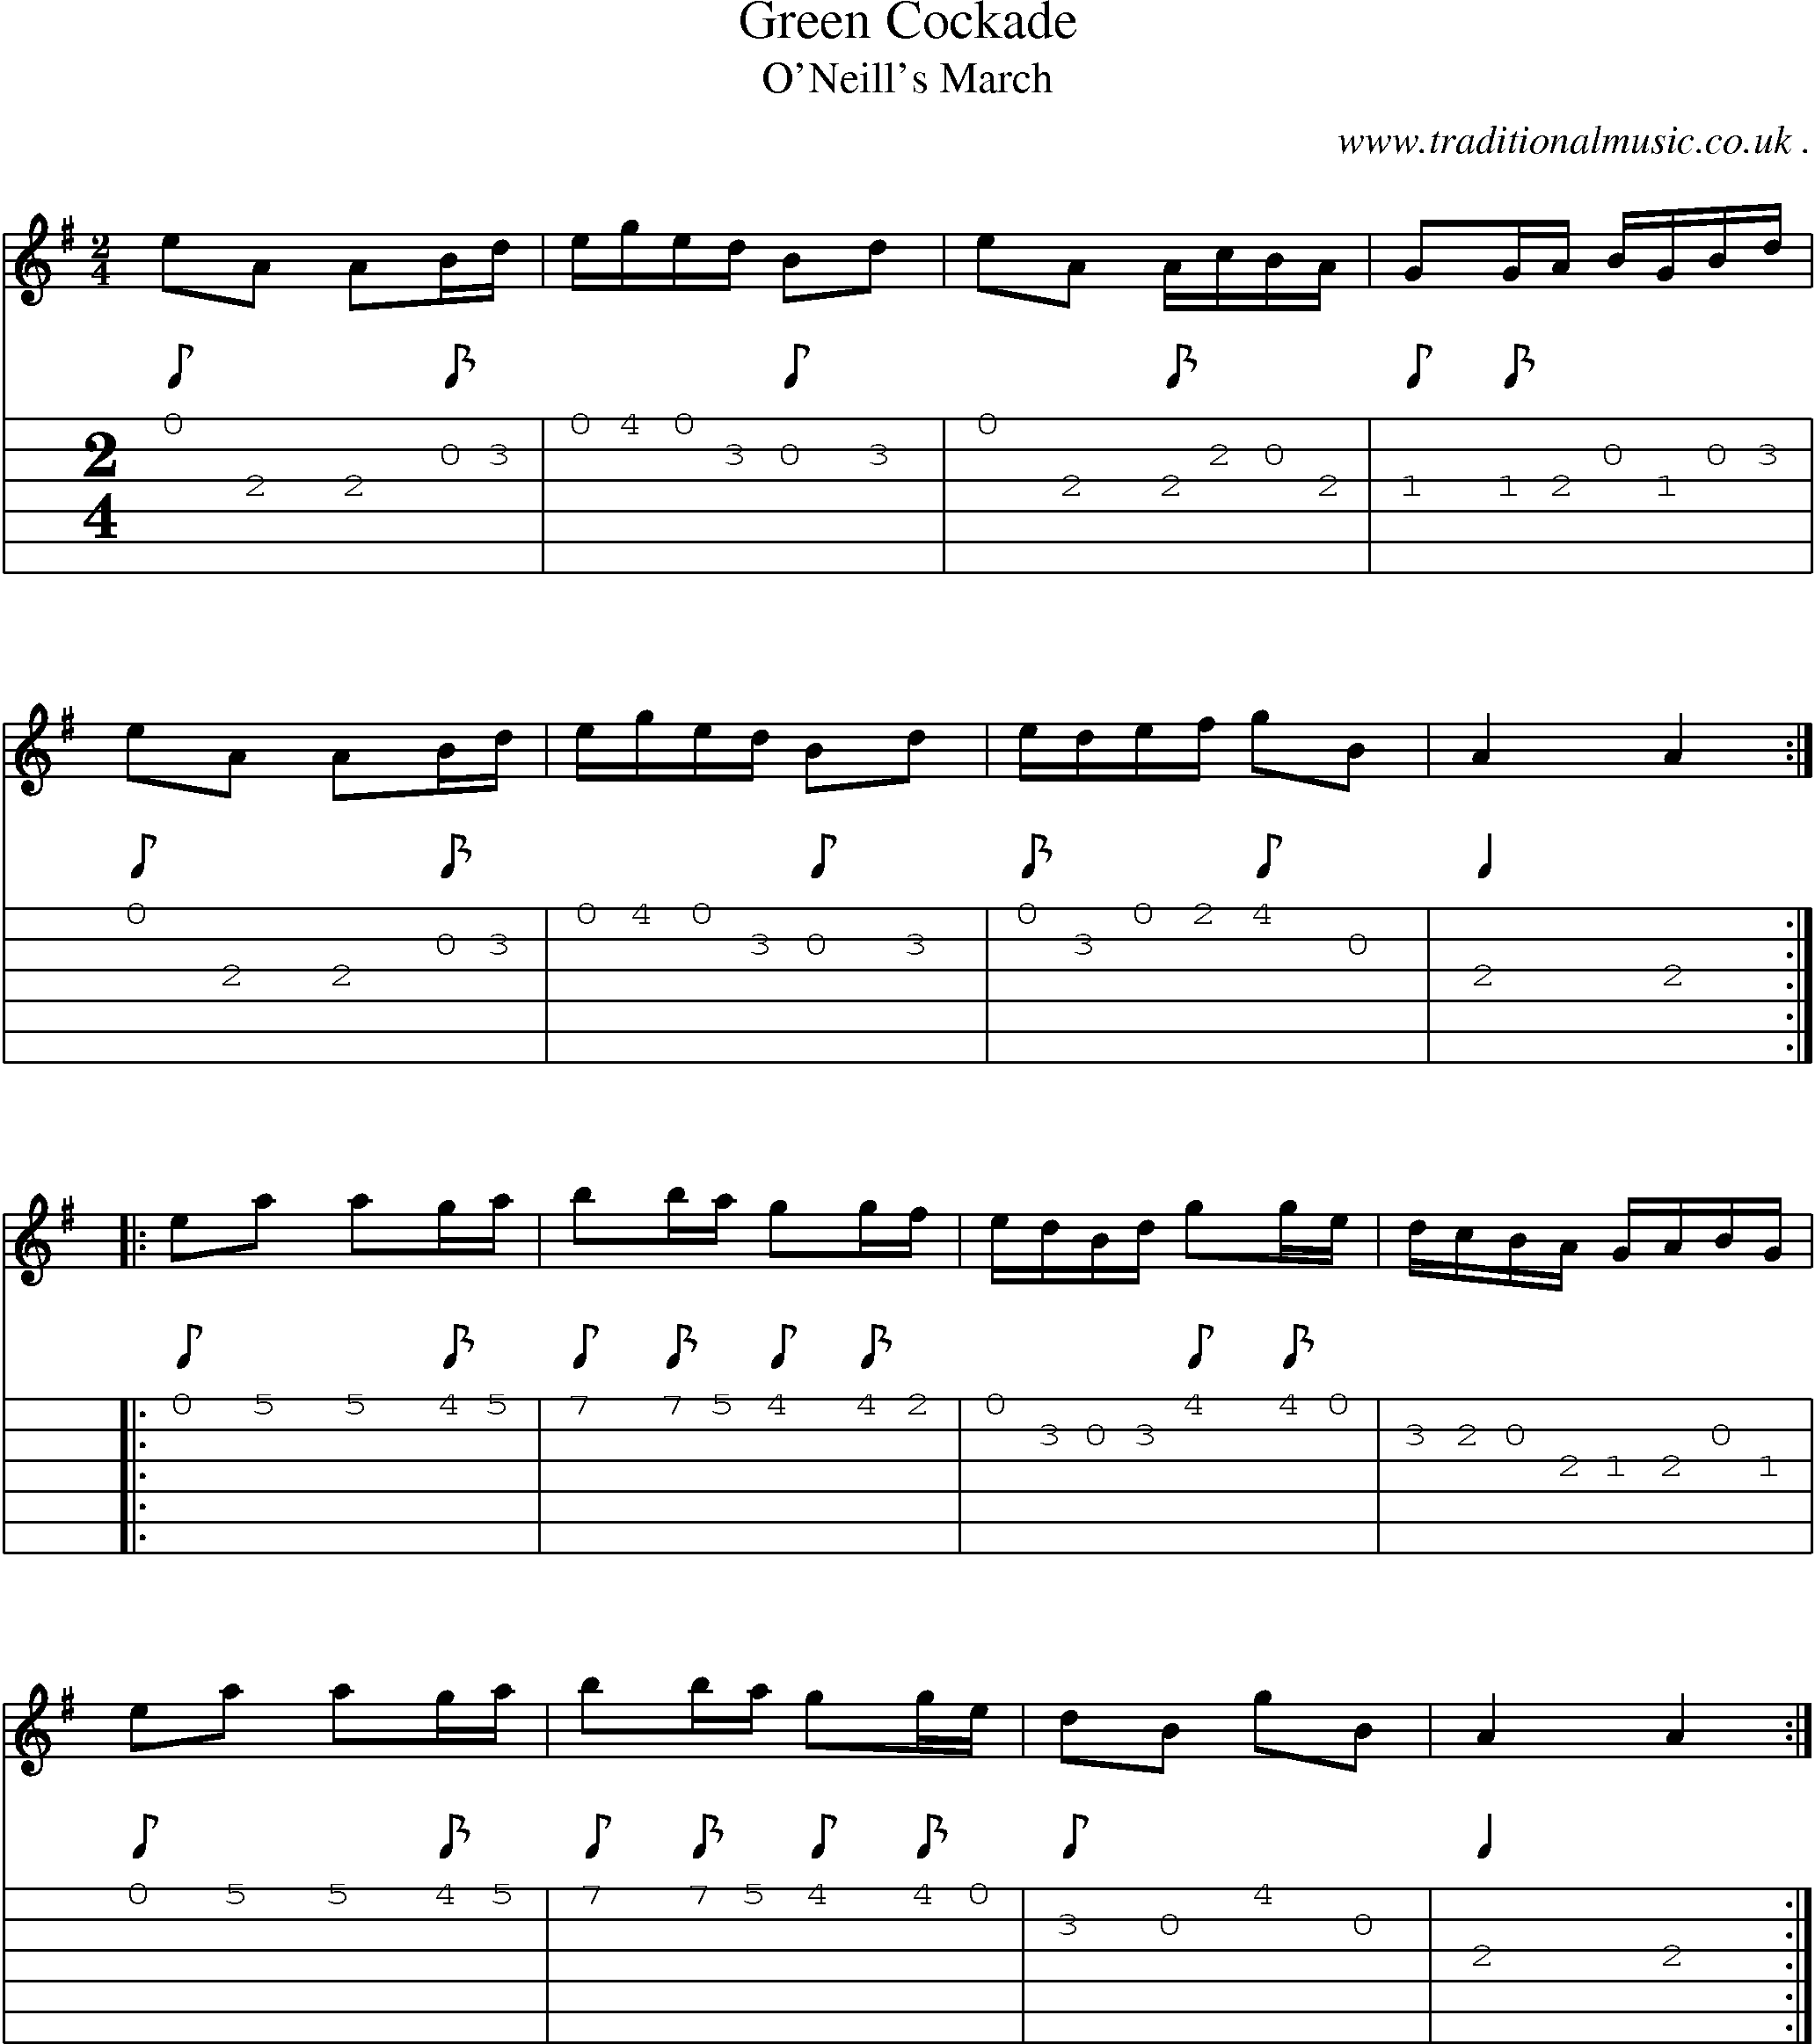 Sheet-Music and Guitar Tabs for Green Cockade